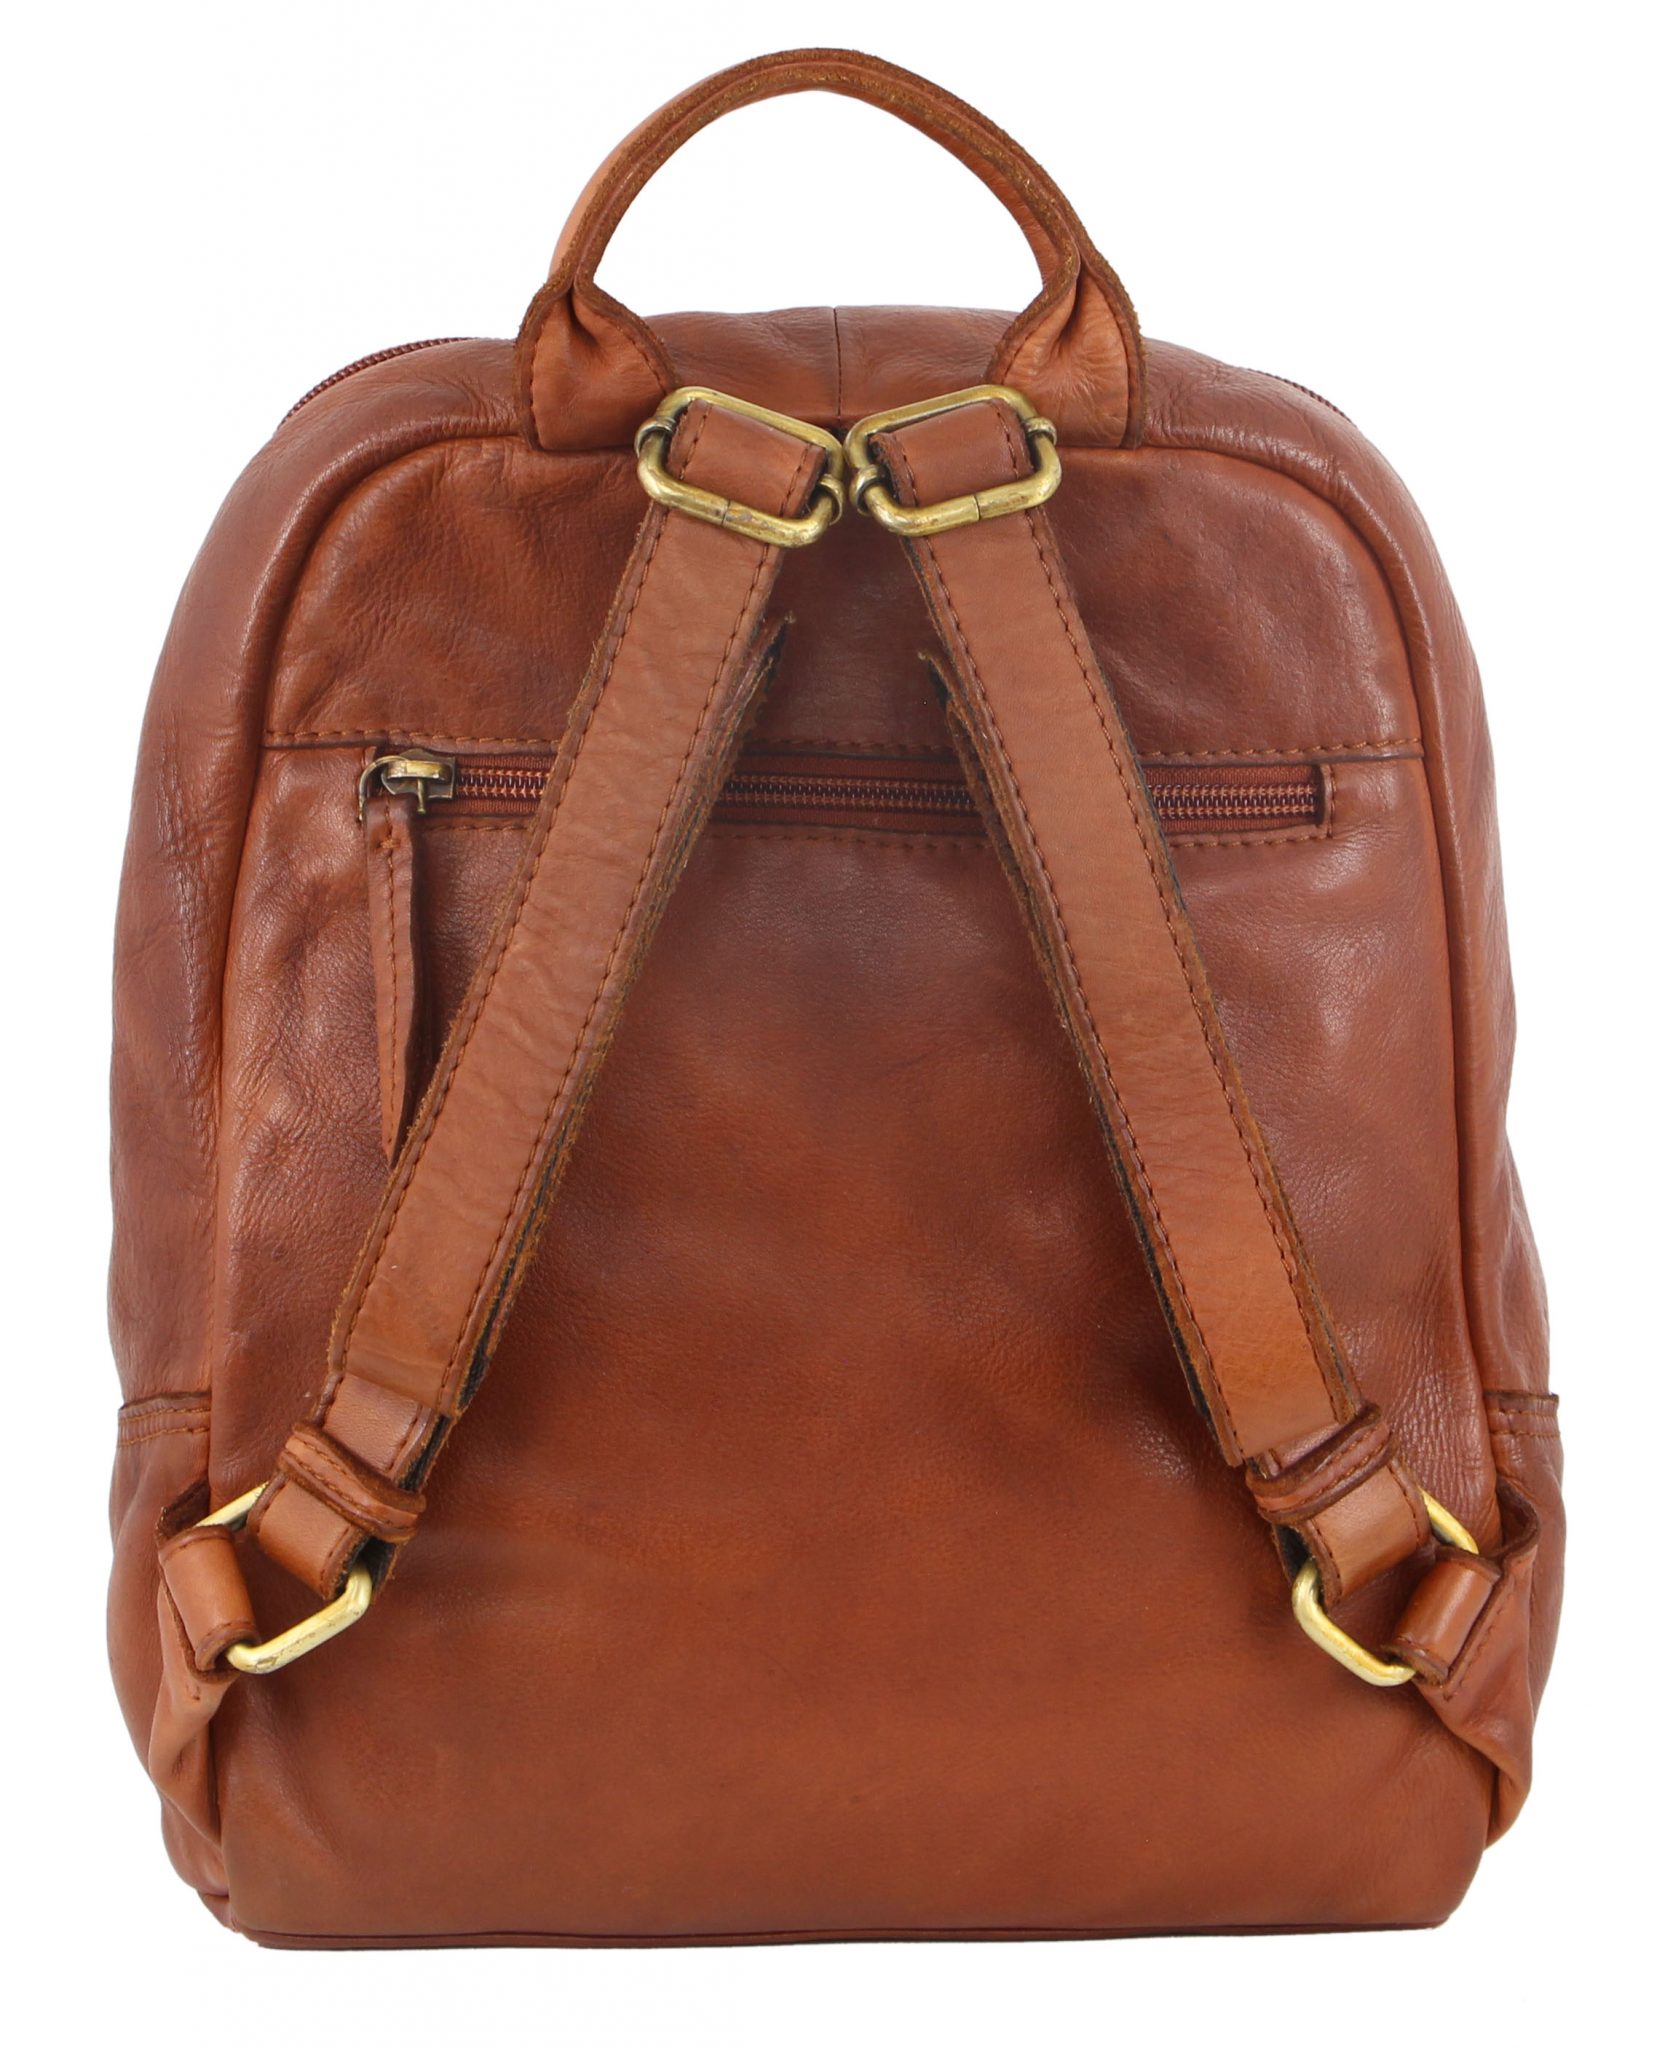 Pierre Cardin Woven Leather Ladies Backpack | The Leather Crew